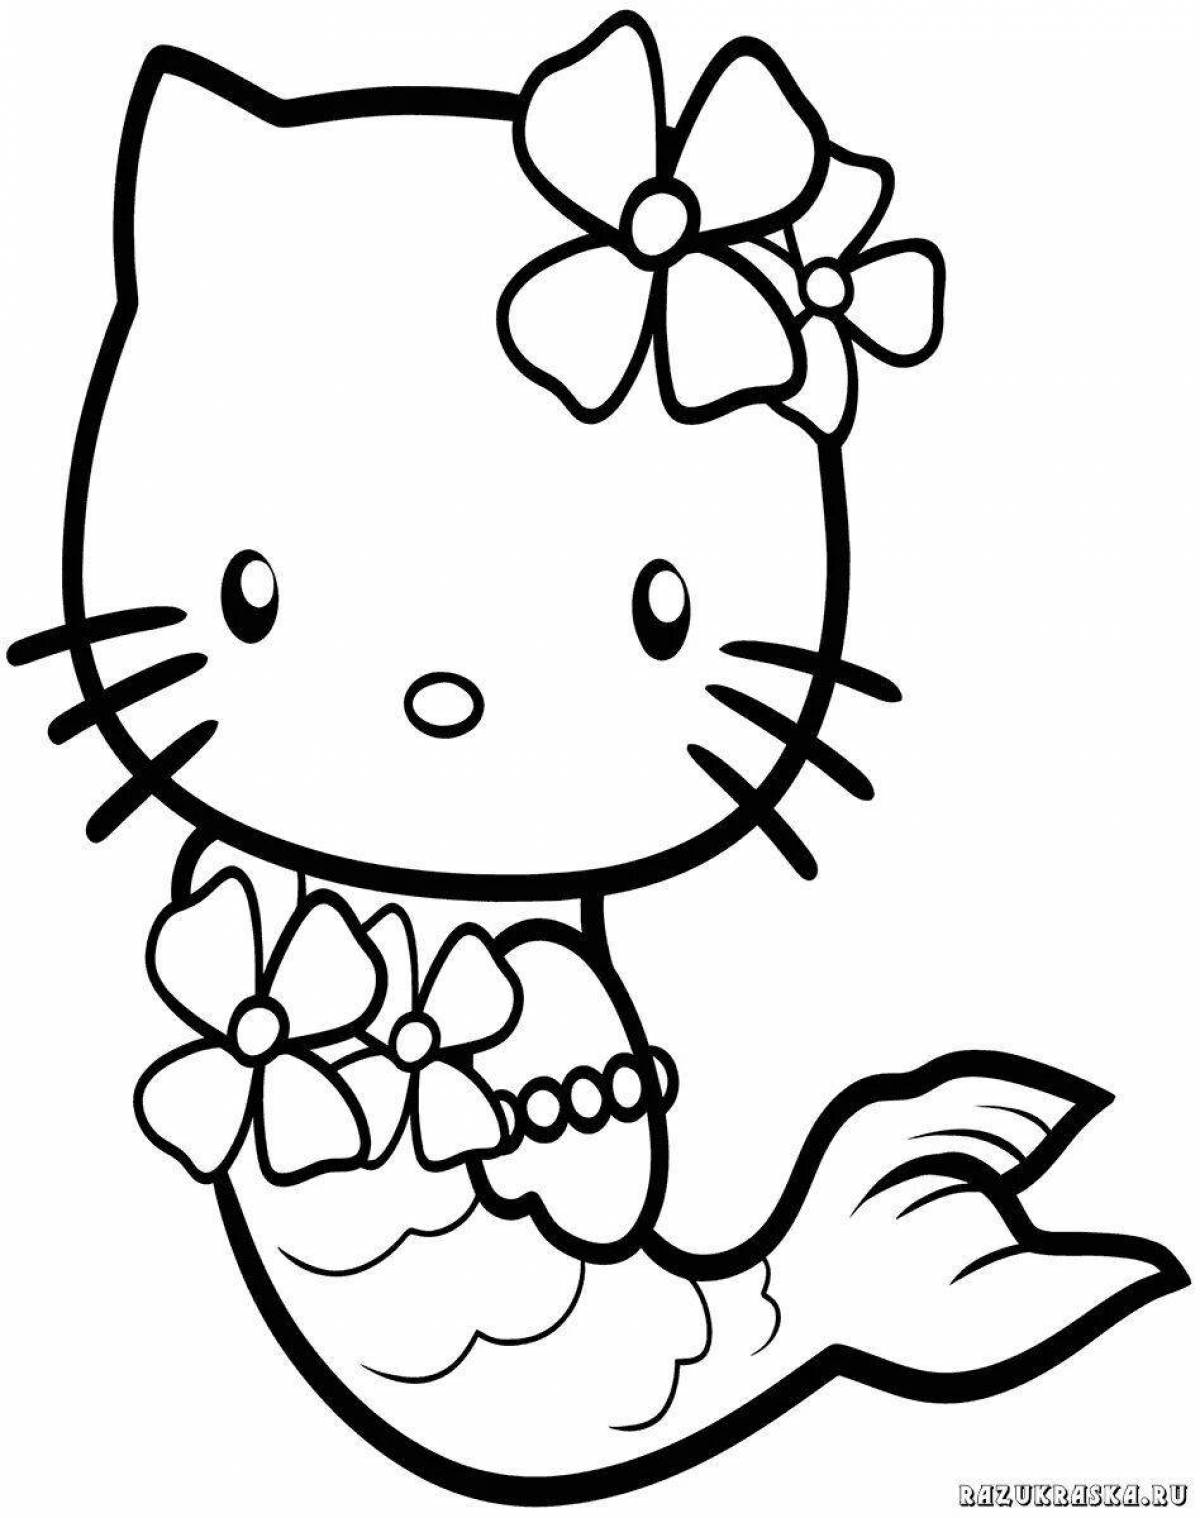 Cathy's playful coloring page